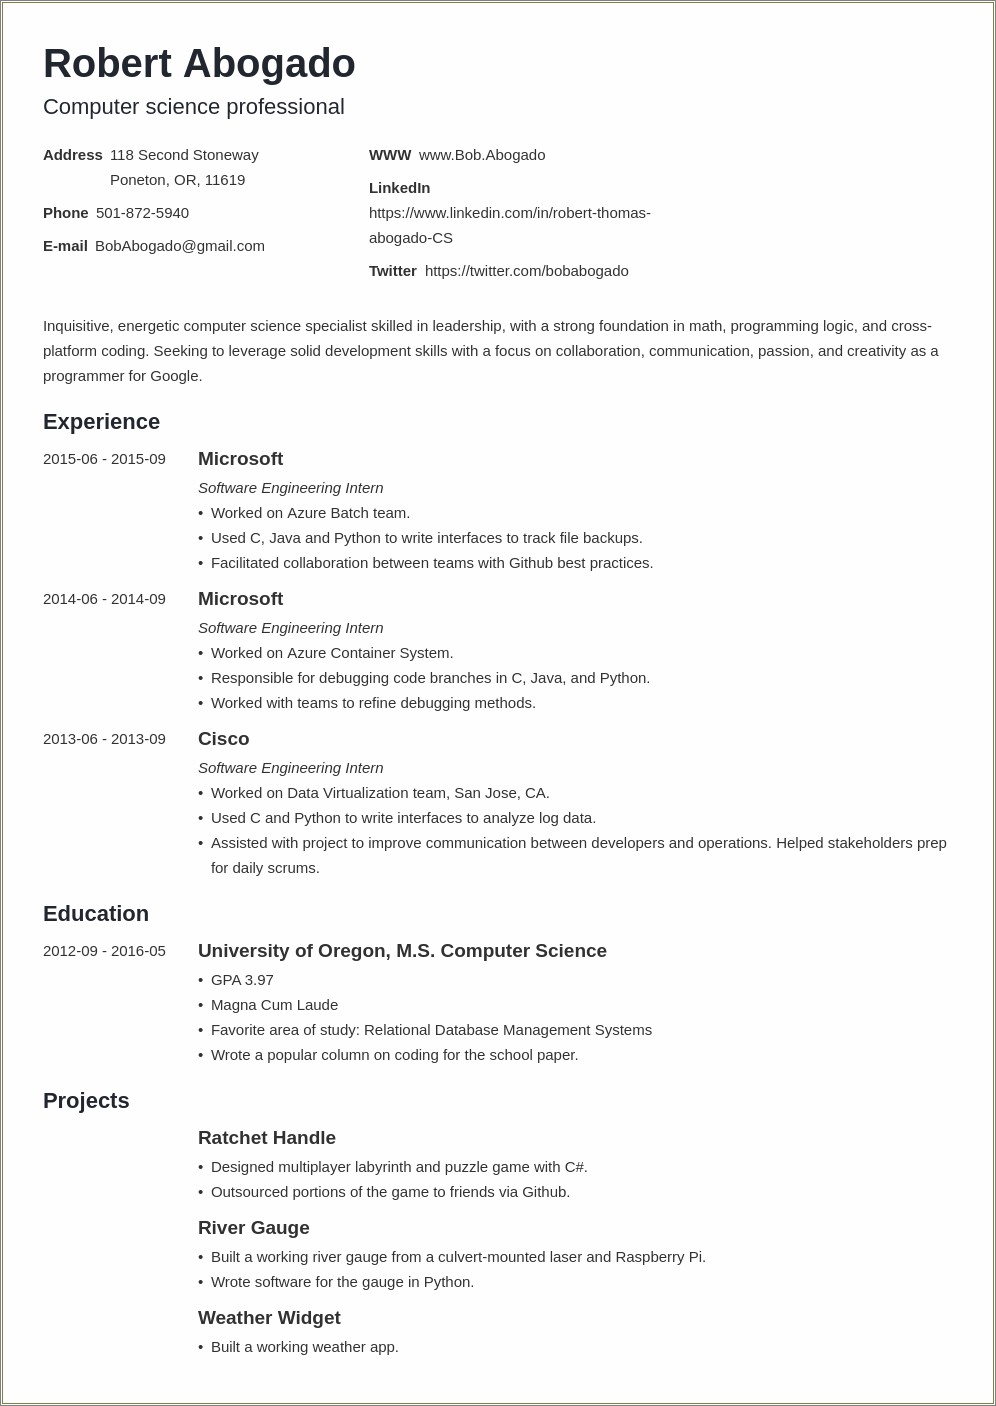 Best Summary Of A Computer Science Student Resume